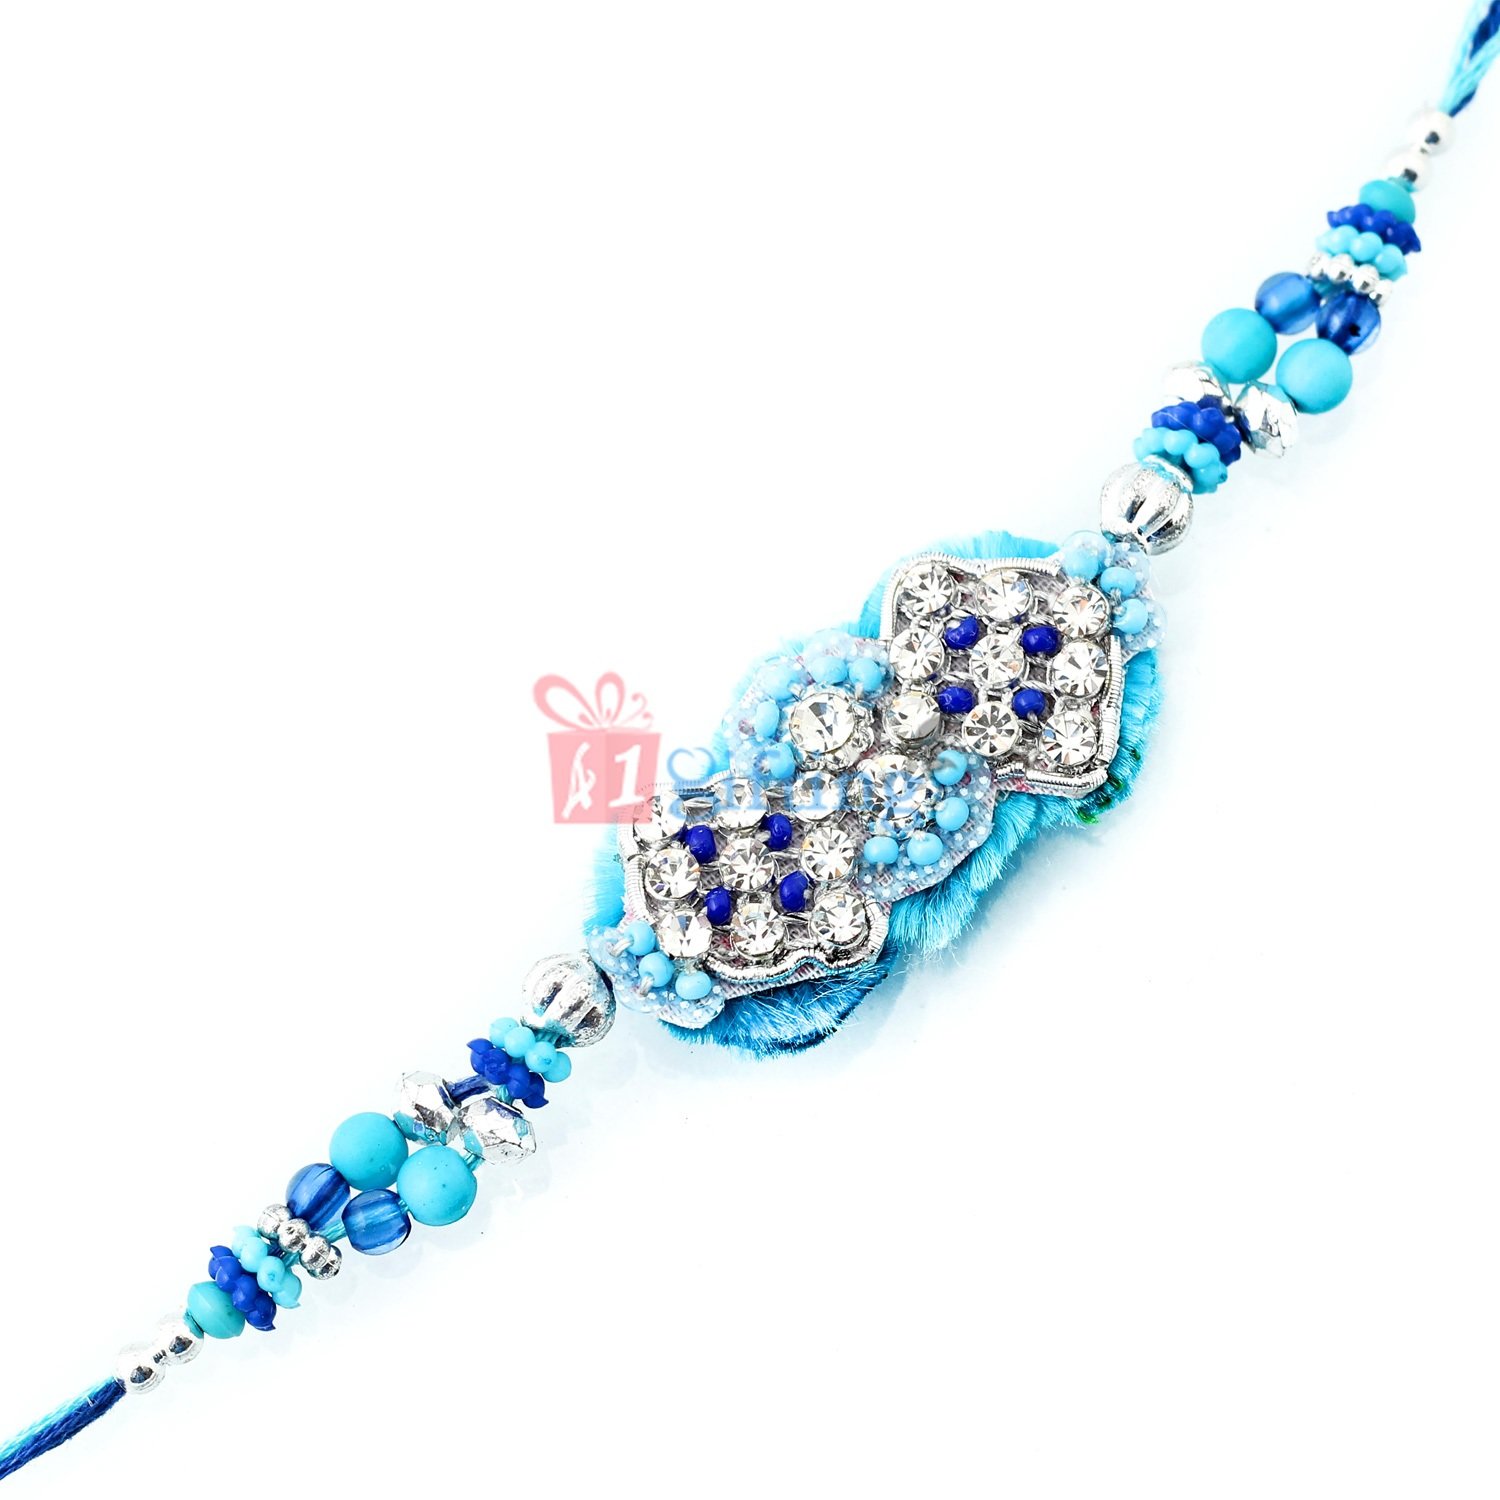 Unique art of jewelry with marrow of beads and diamonds